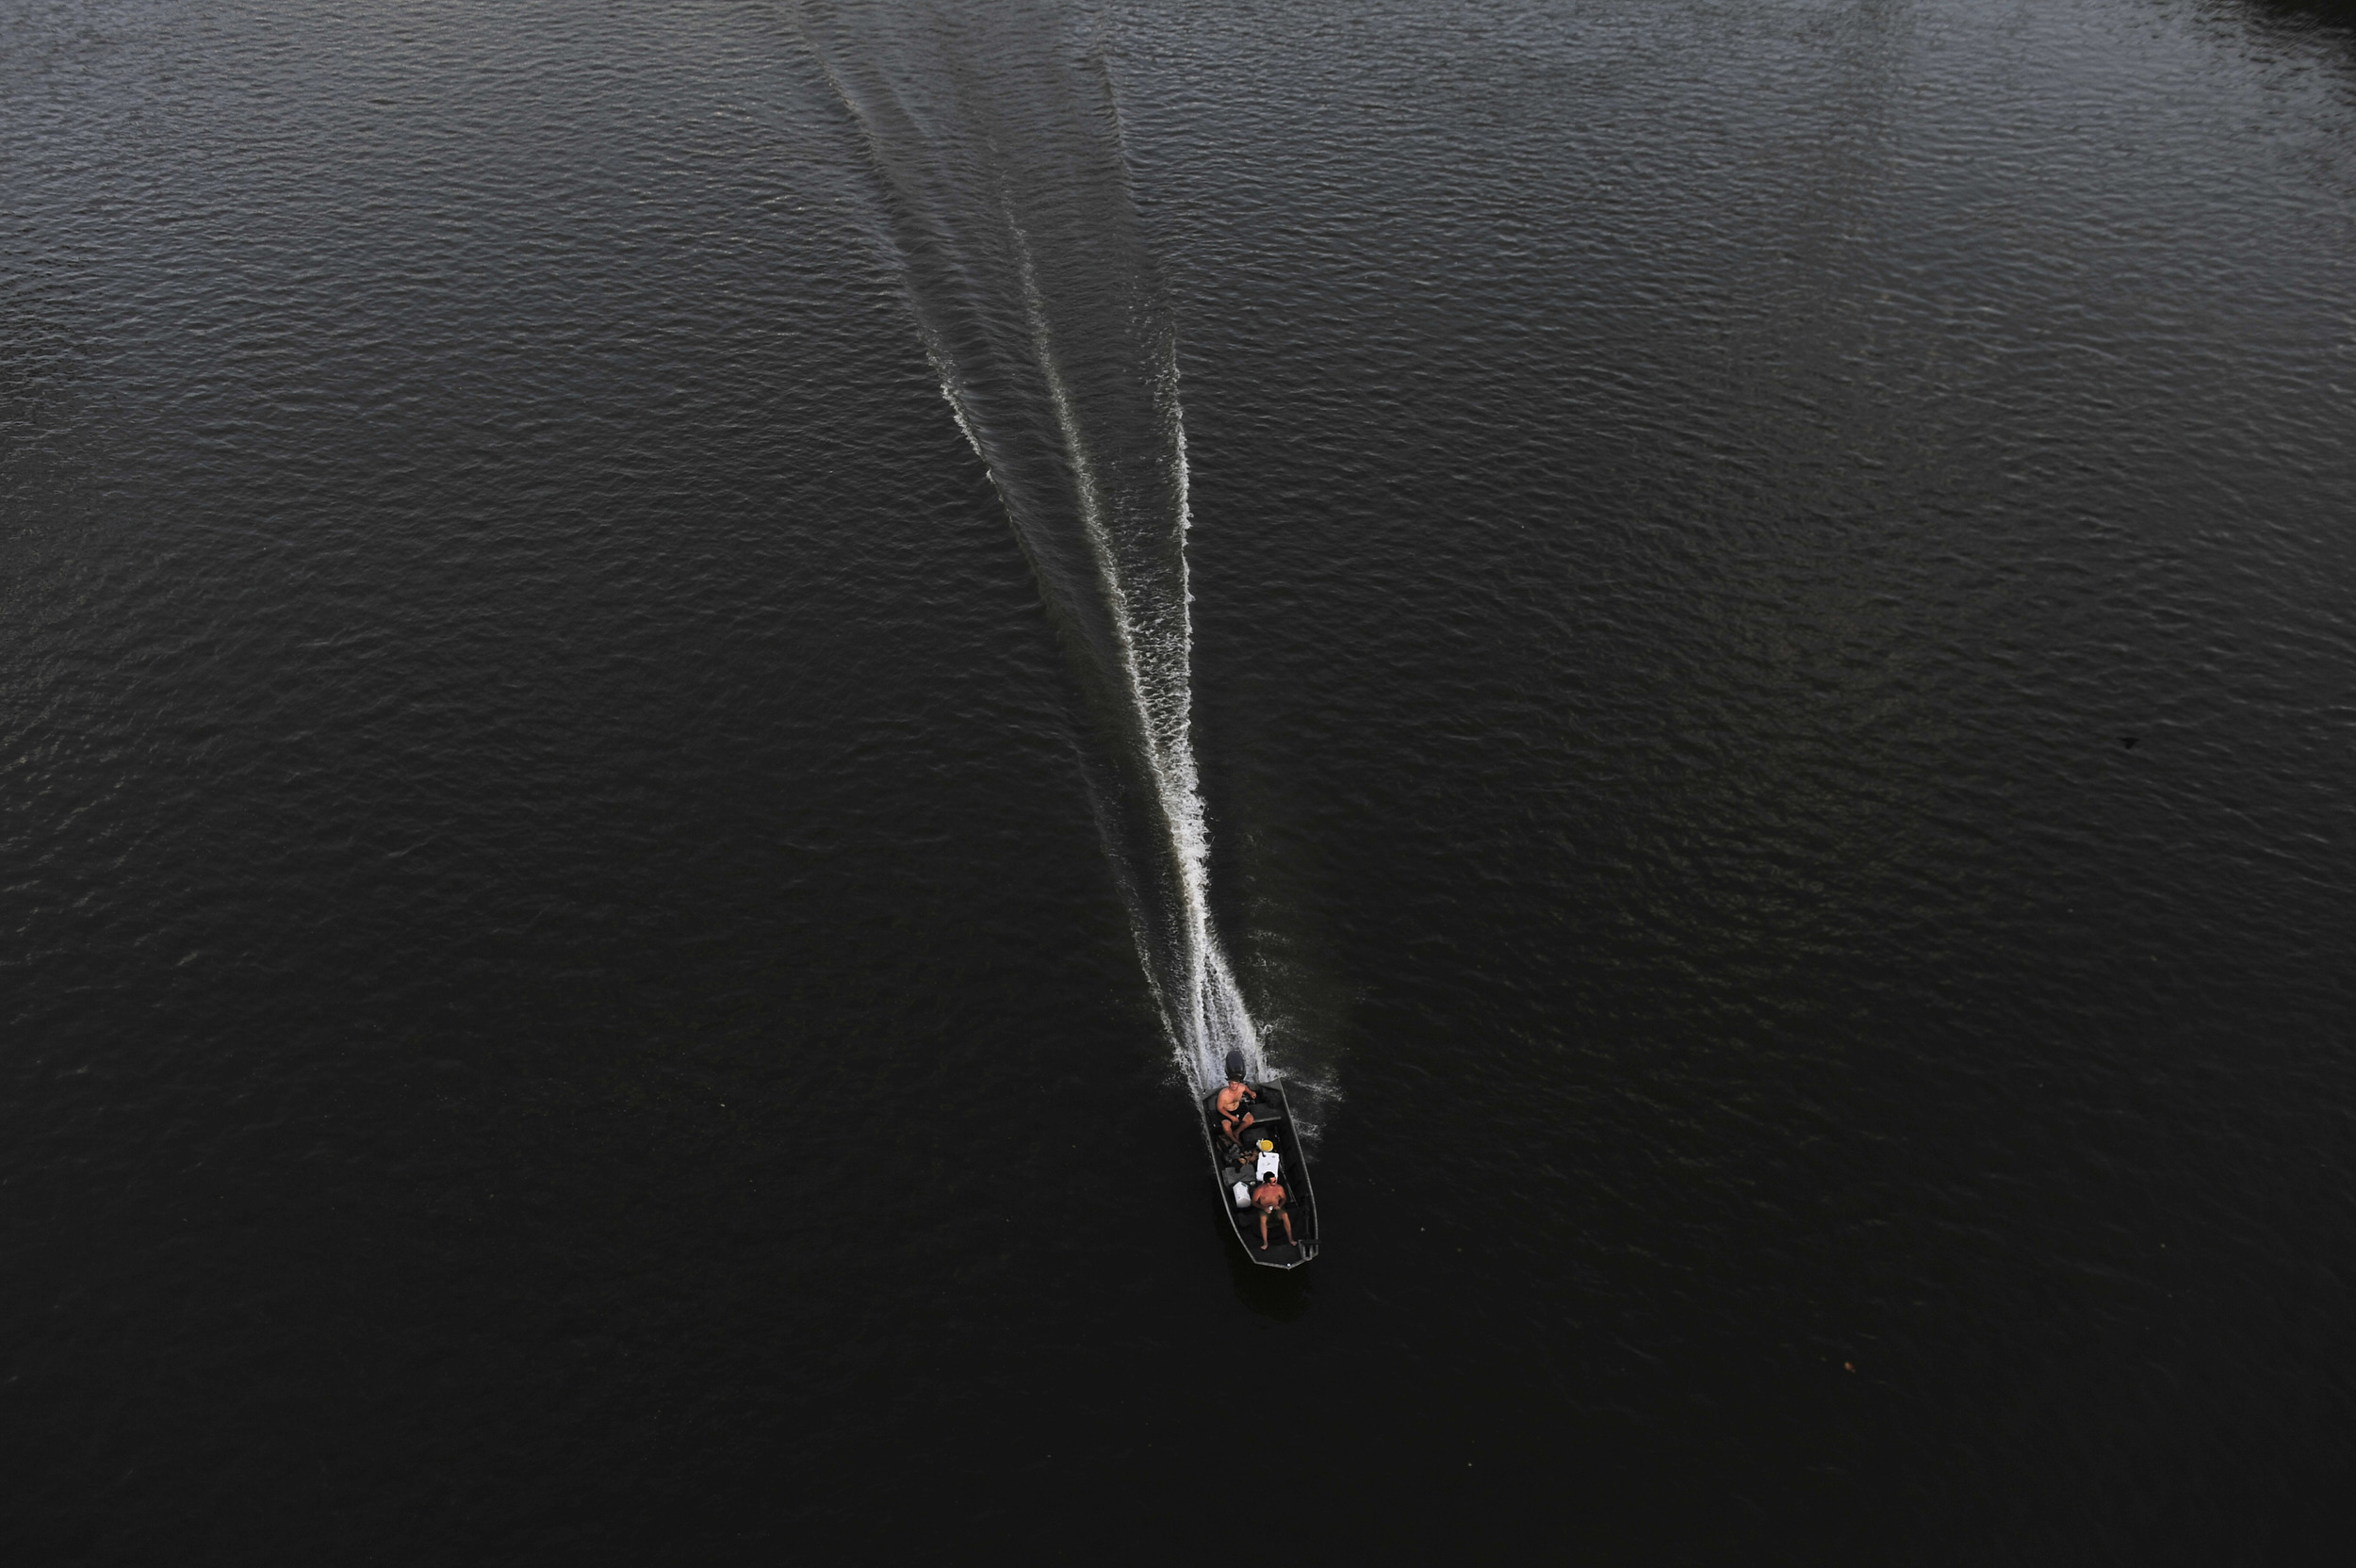  A fishing boat cuts a wake in the dark waters of the Cumberland seen from the Shelby Street Pedestrian Bridge in Nashville, Tenn. 